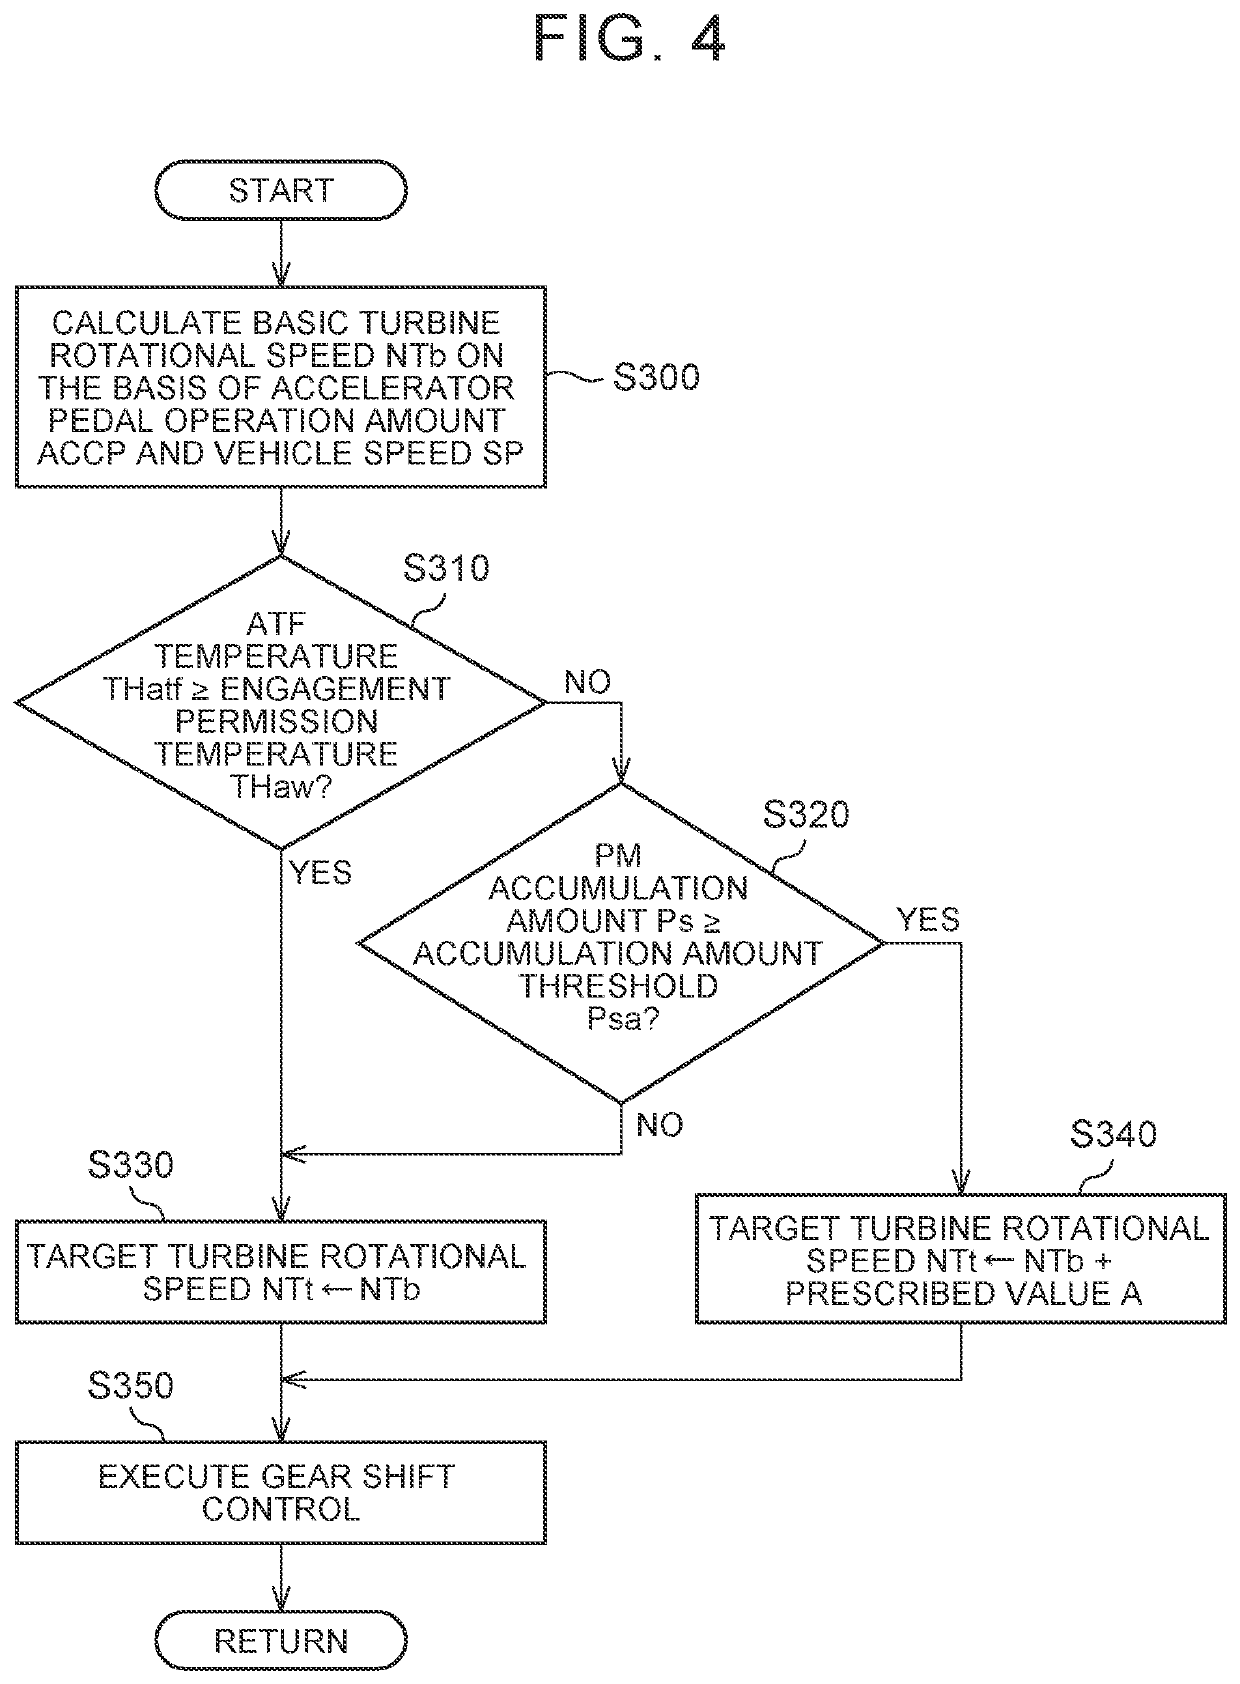 In-vehicle controller